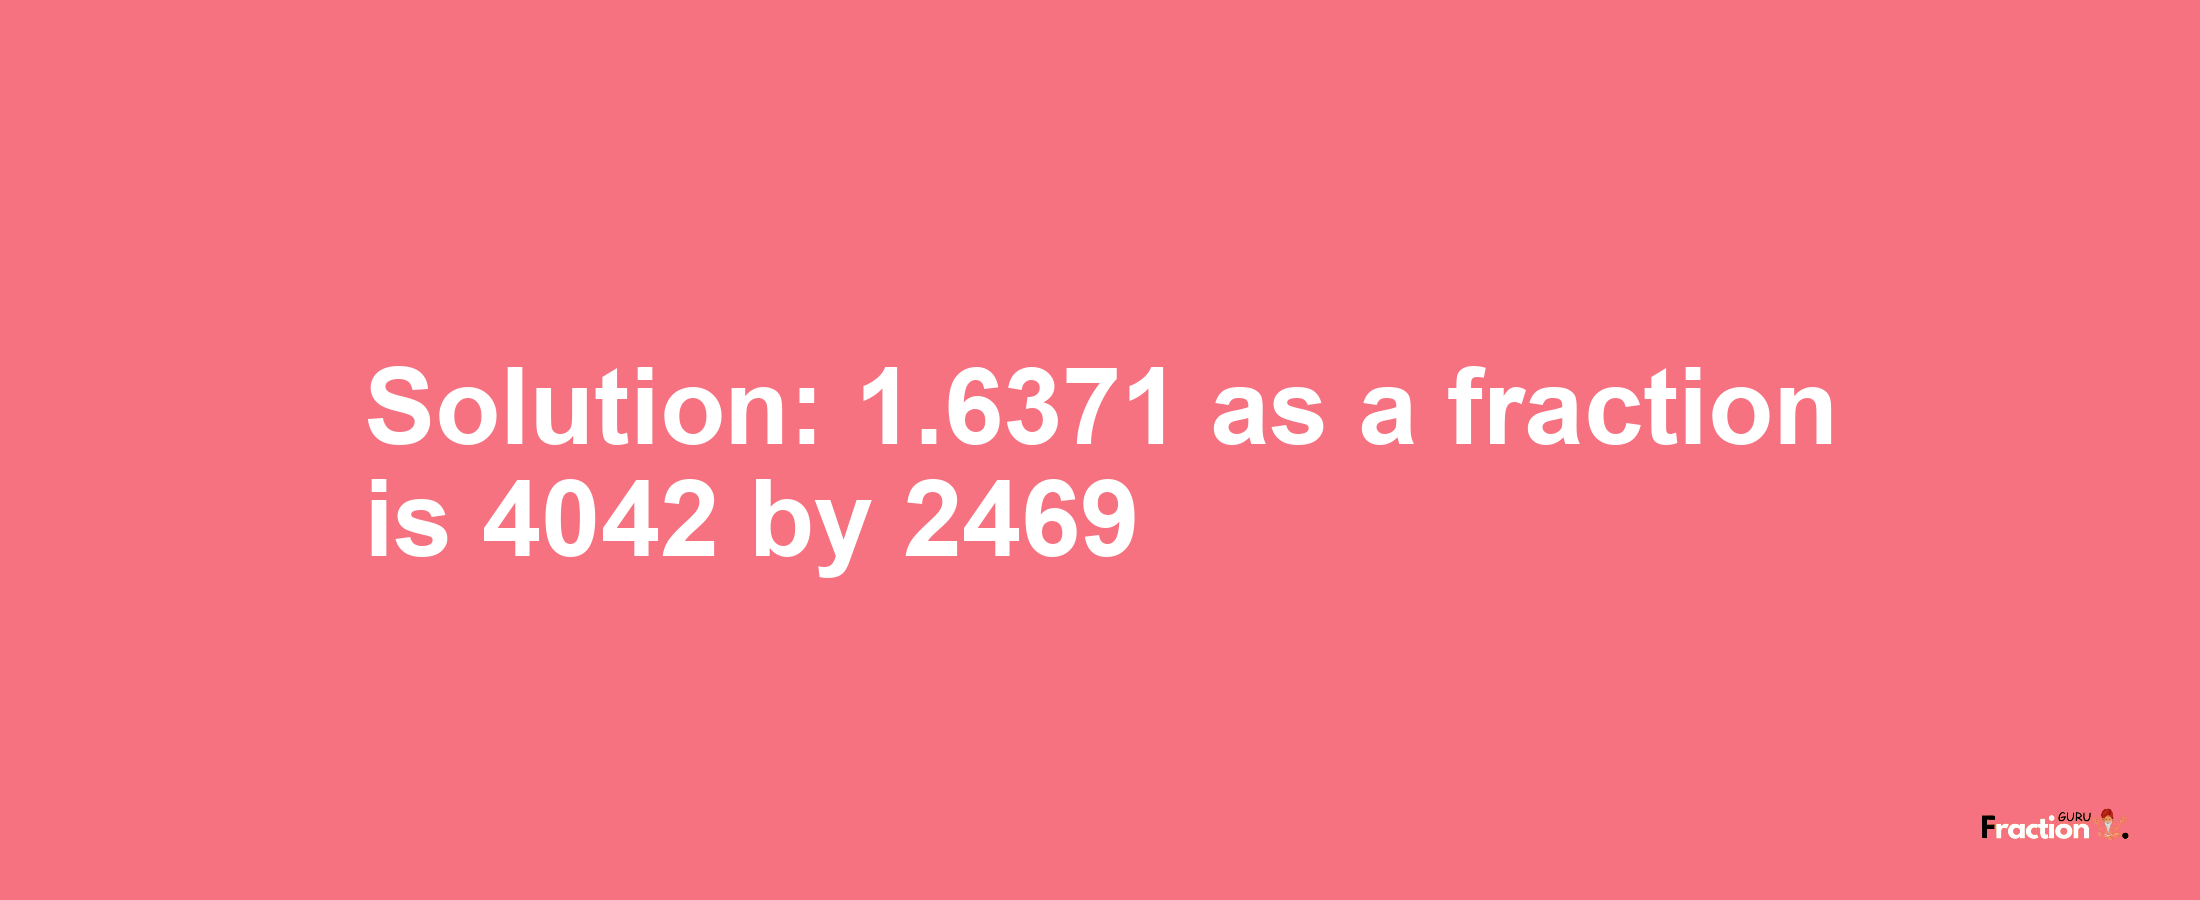 Solution:1.6371 as a fraction is 4042/2469